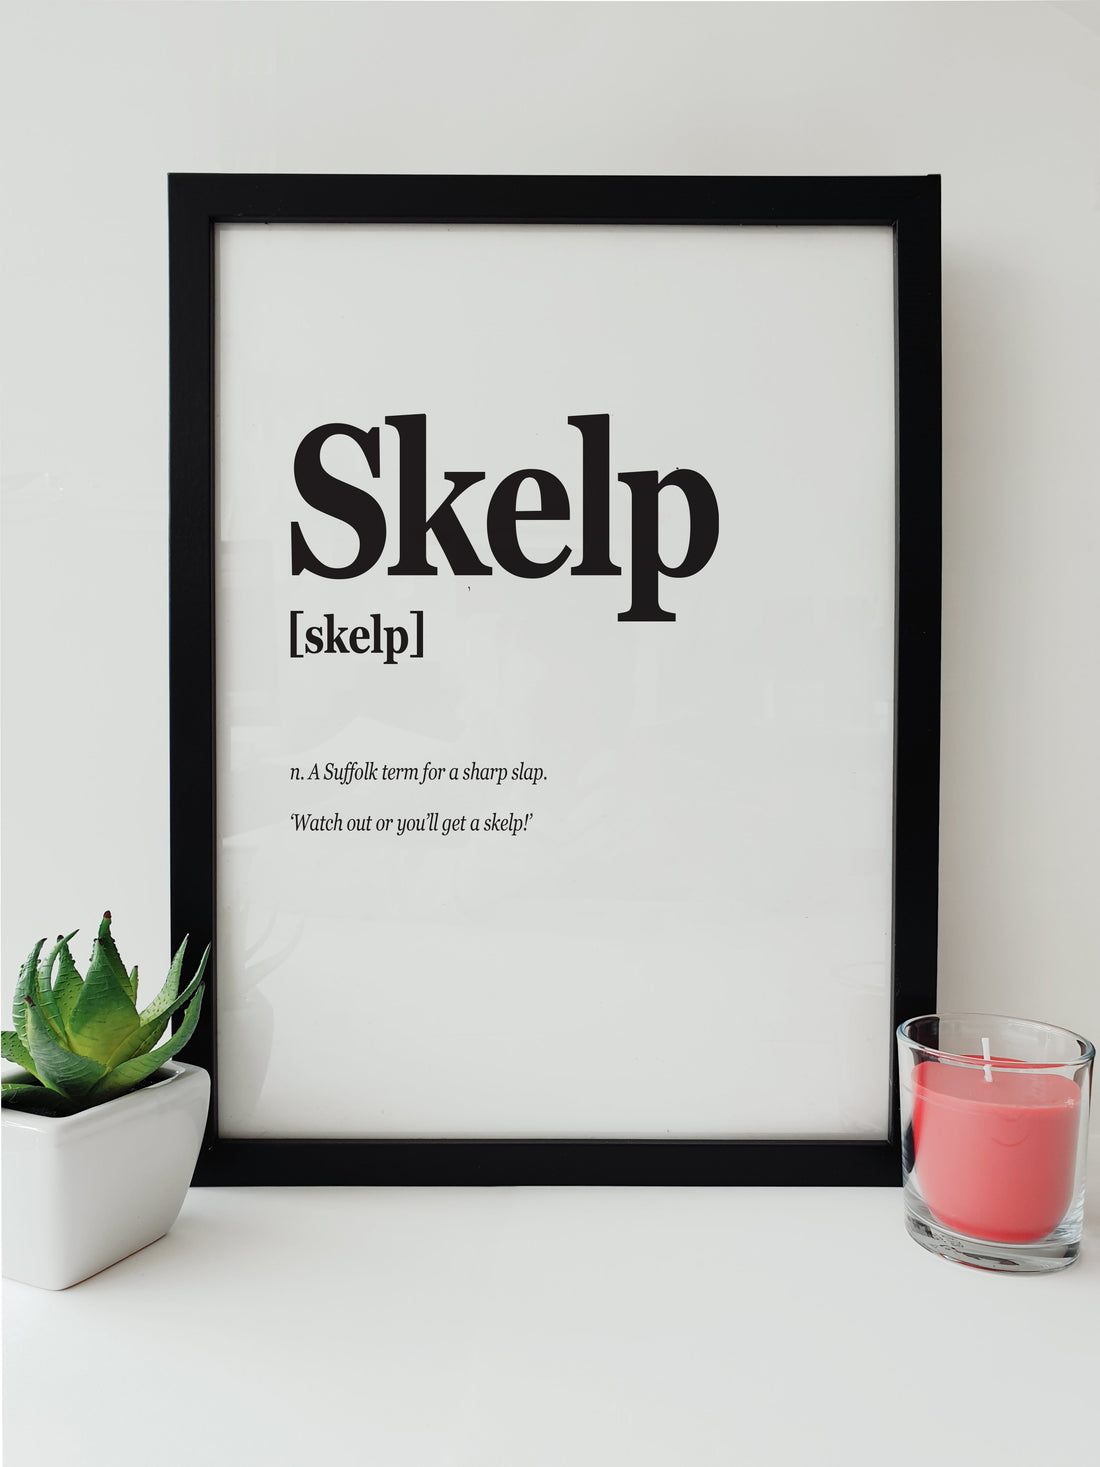 Modern black and white print displaying the word 'Skelp' from Suffolk dialect, meaning a sharp slap, alongside the humorous warning 'Watch out or you’ll get a skelp!' in an elegant font designed by local lingo